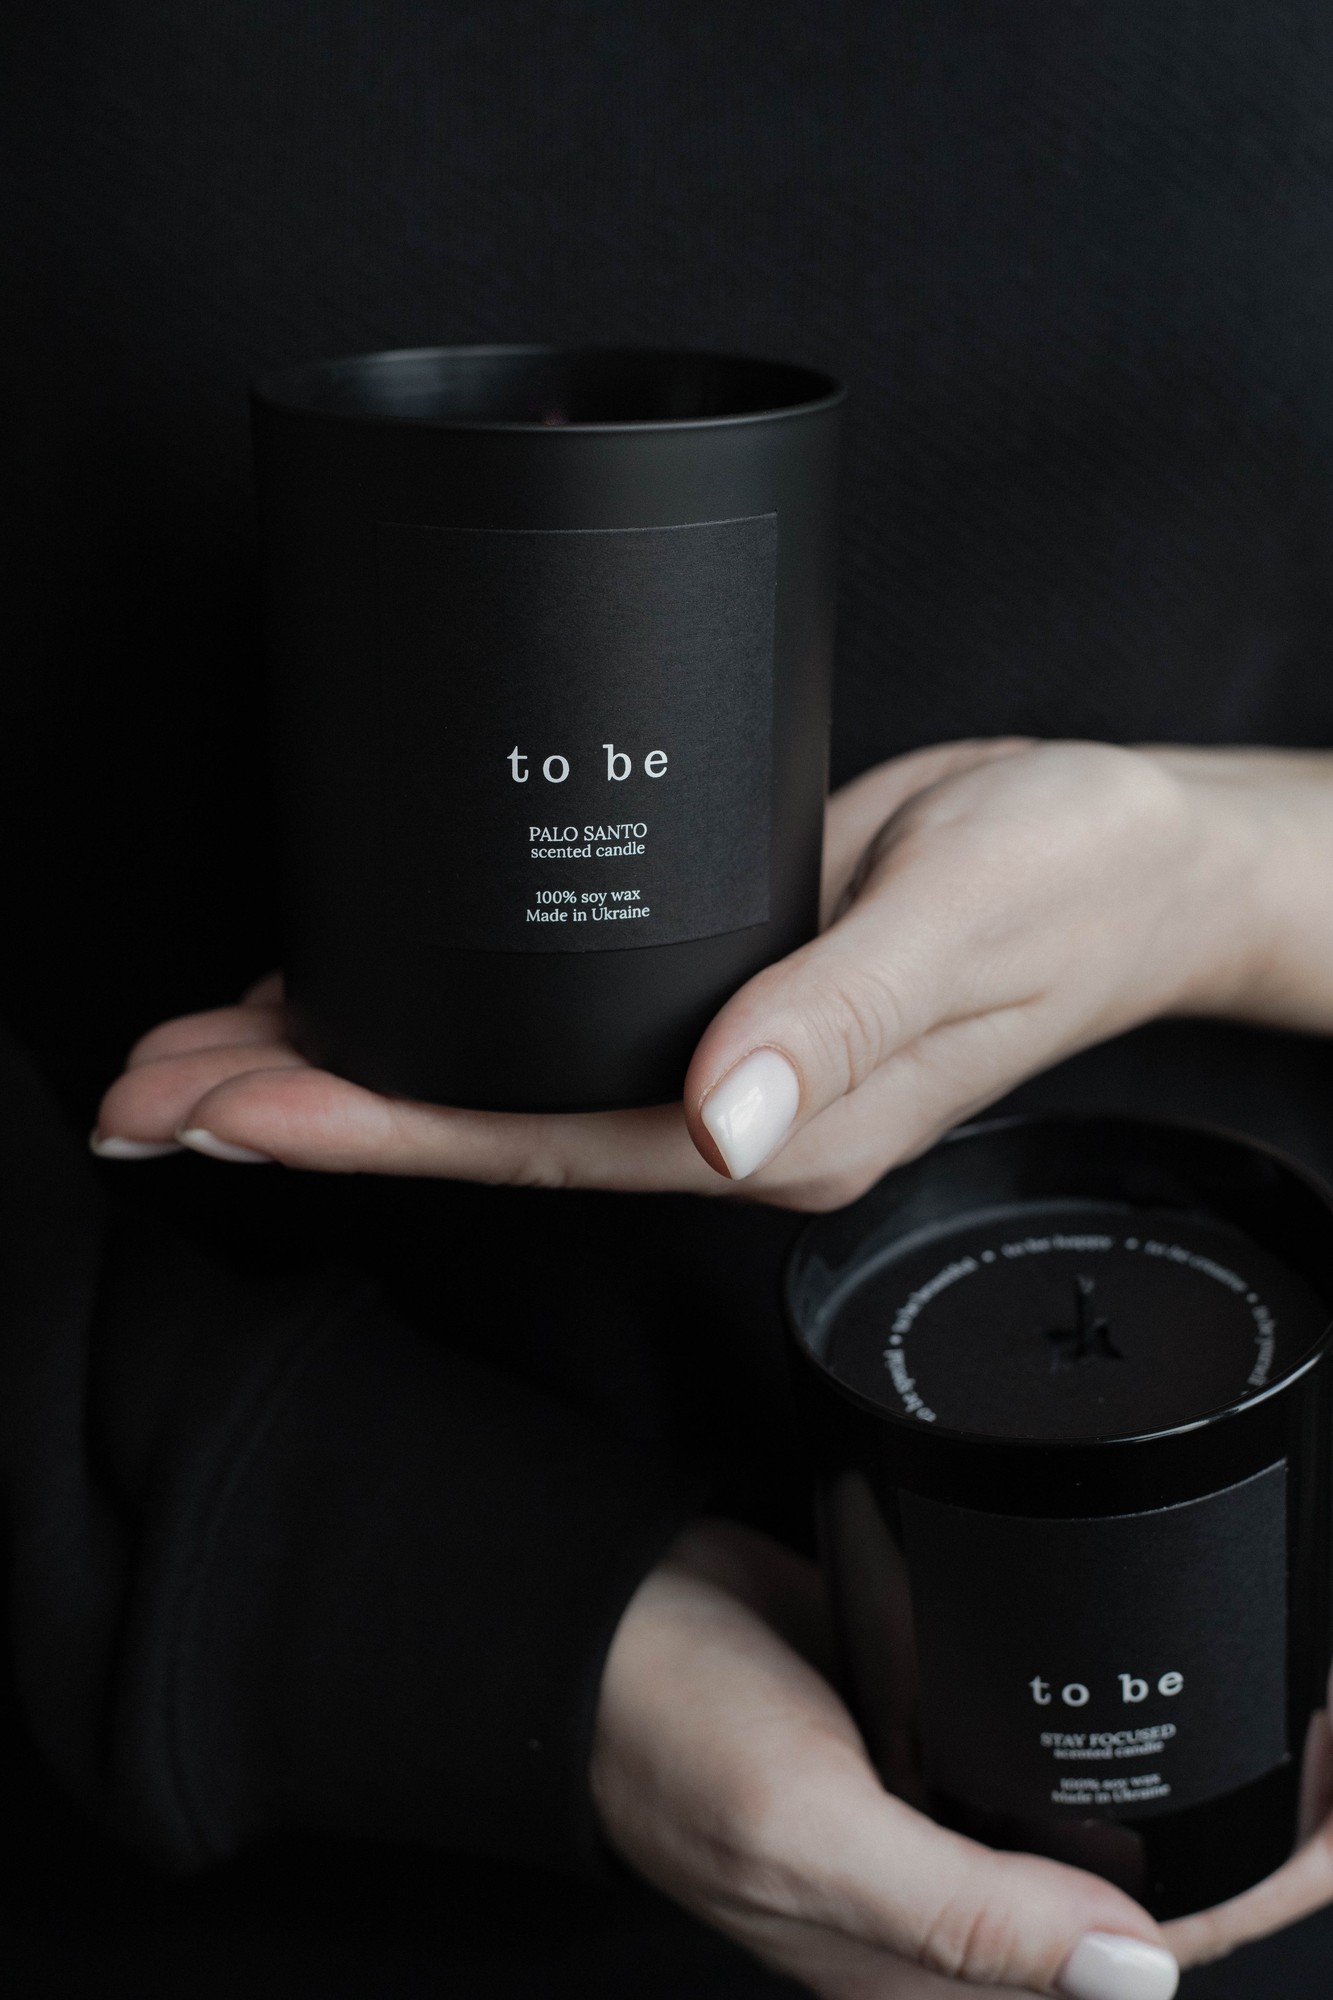 Scented candle "to be", 100% soy wax,  PALO SANTO